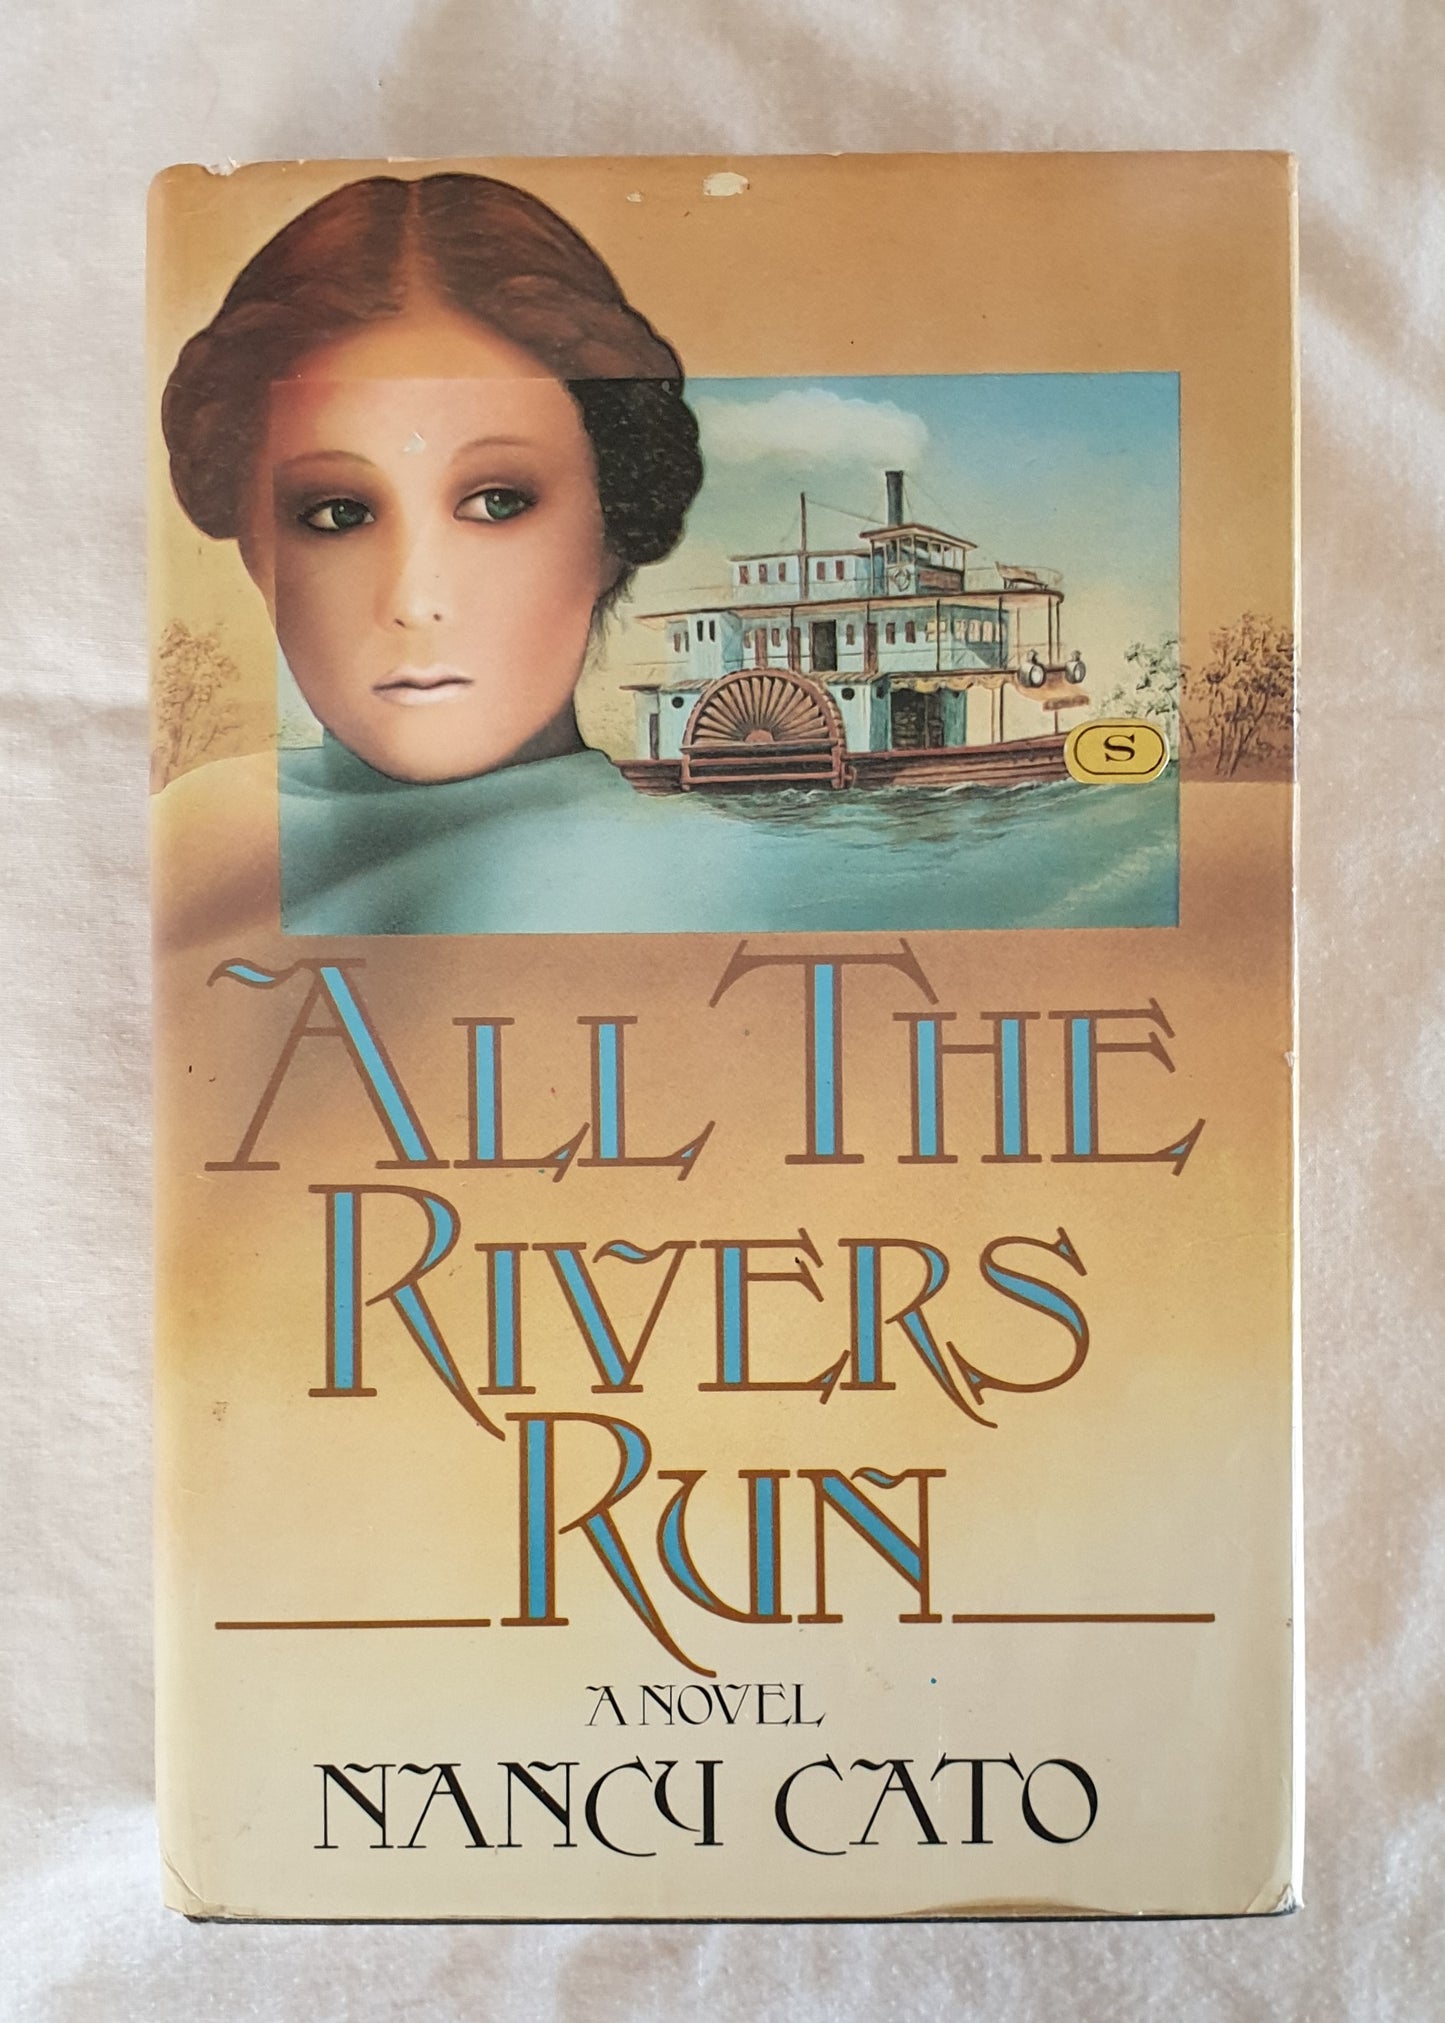 All The Rivers Run by Nancy Cato